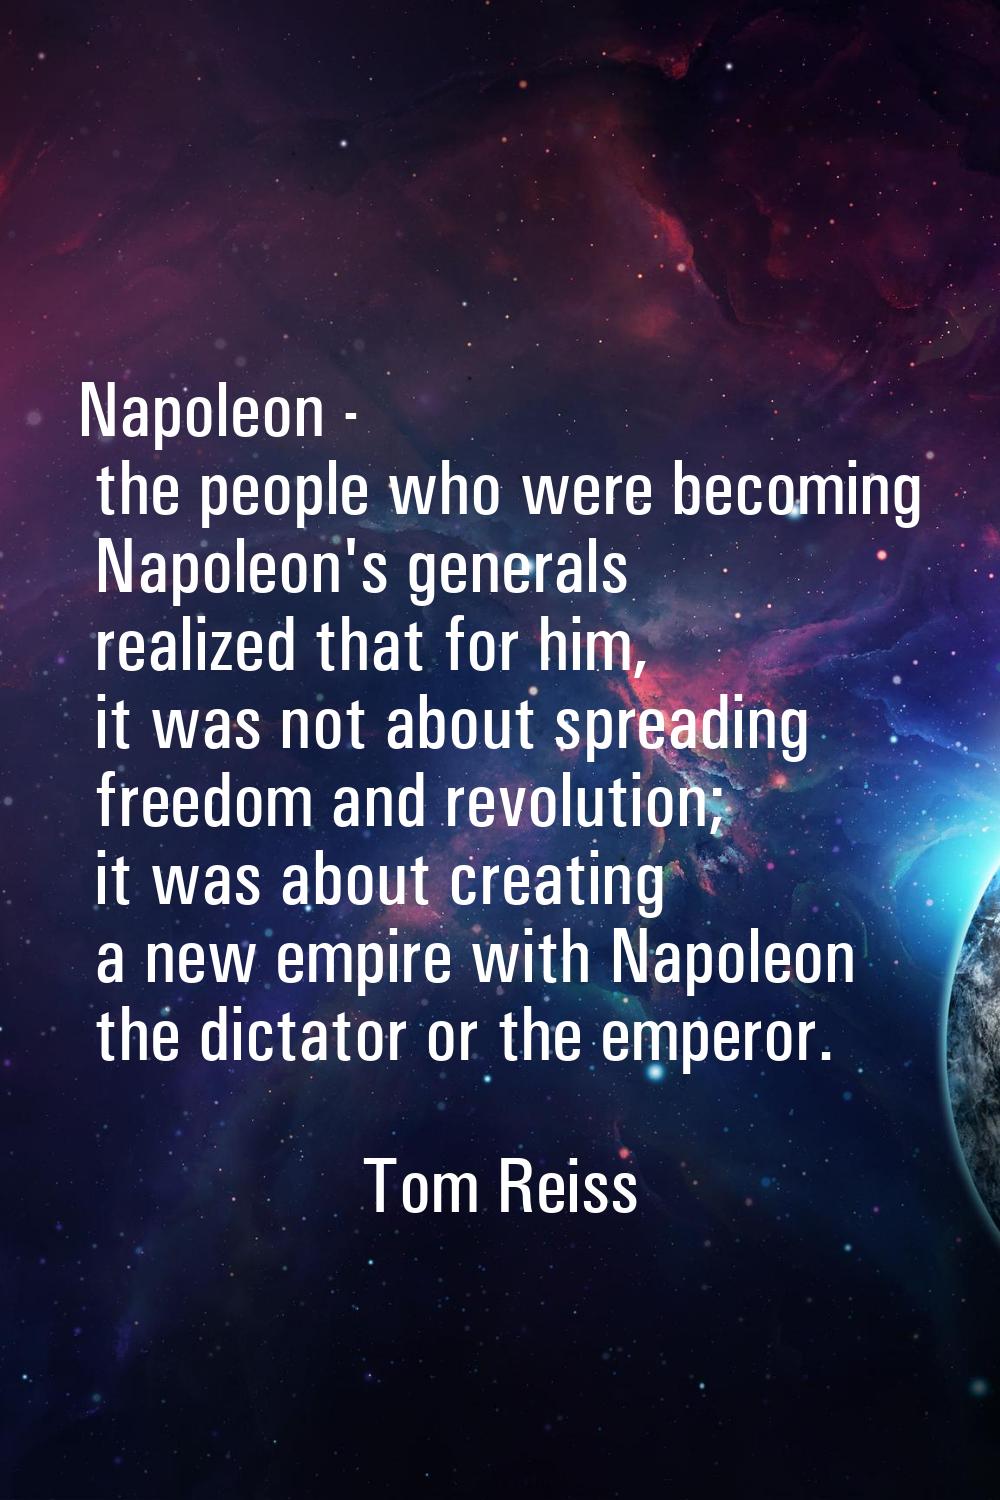 Napoleon - the people who were becoming Napoleon's generals realized that for him, it was not about